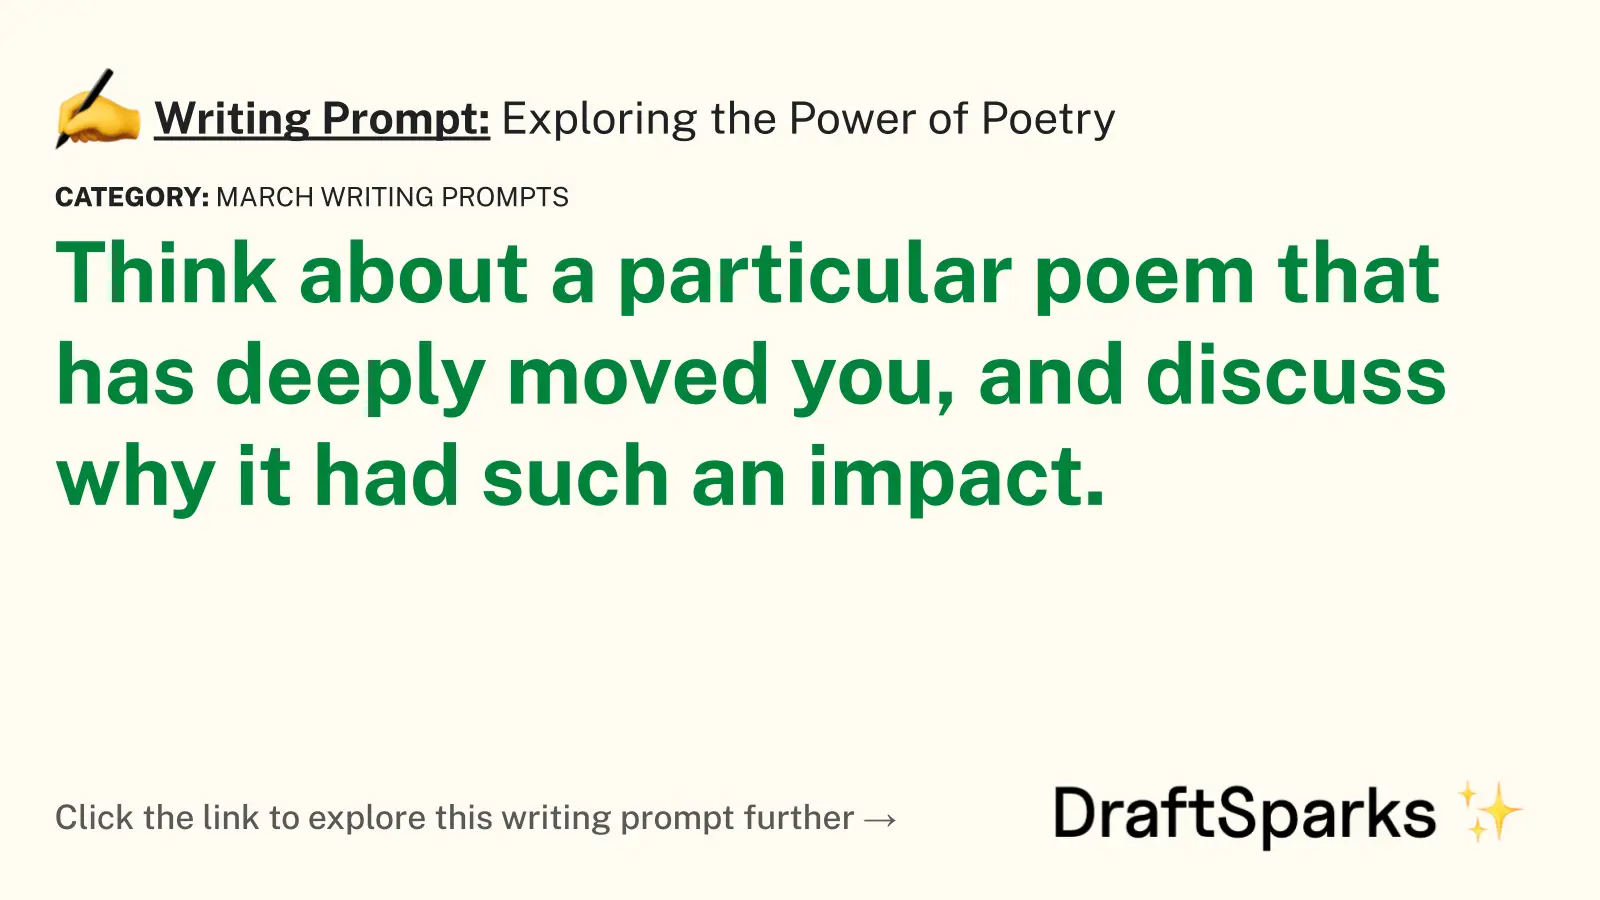 Exploring the Power of Poetry